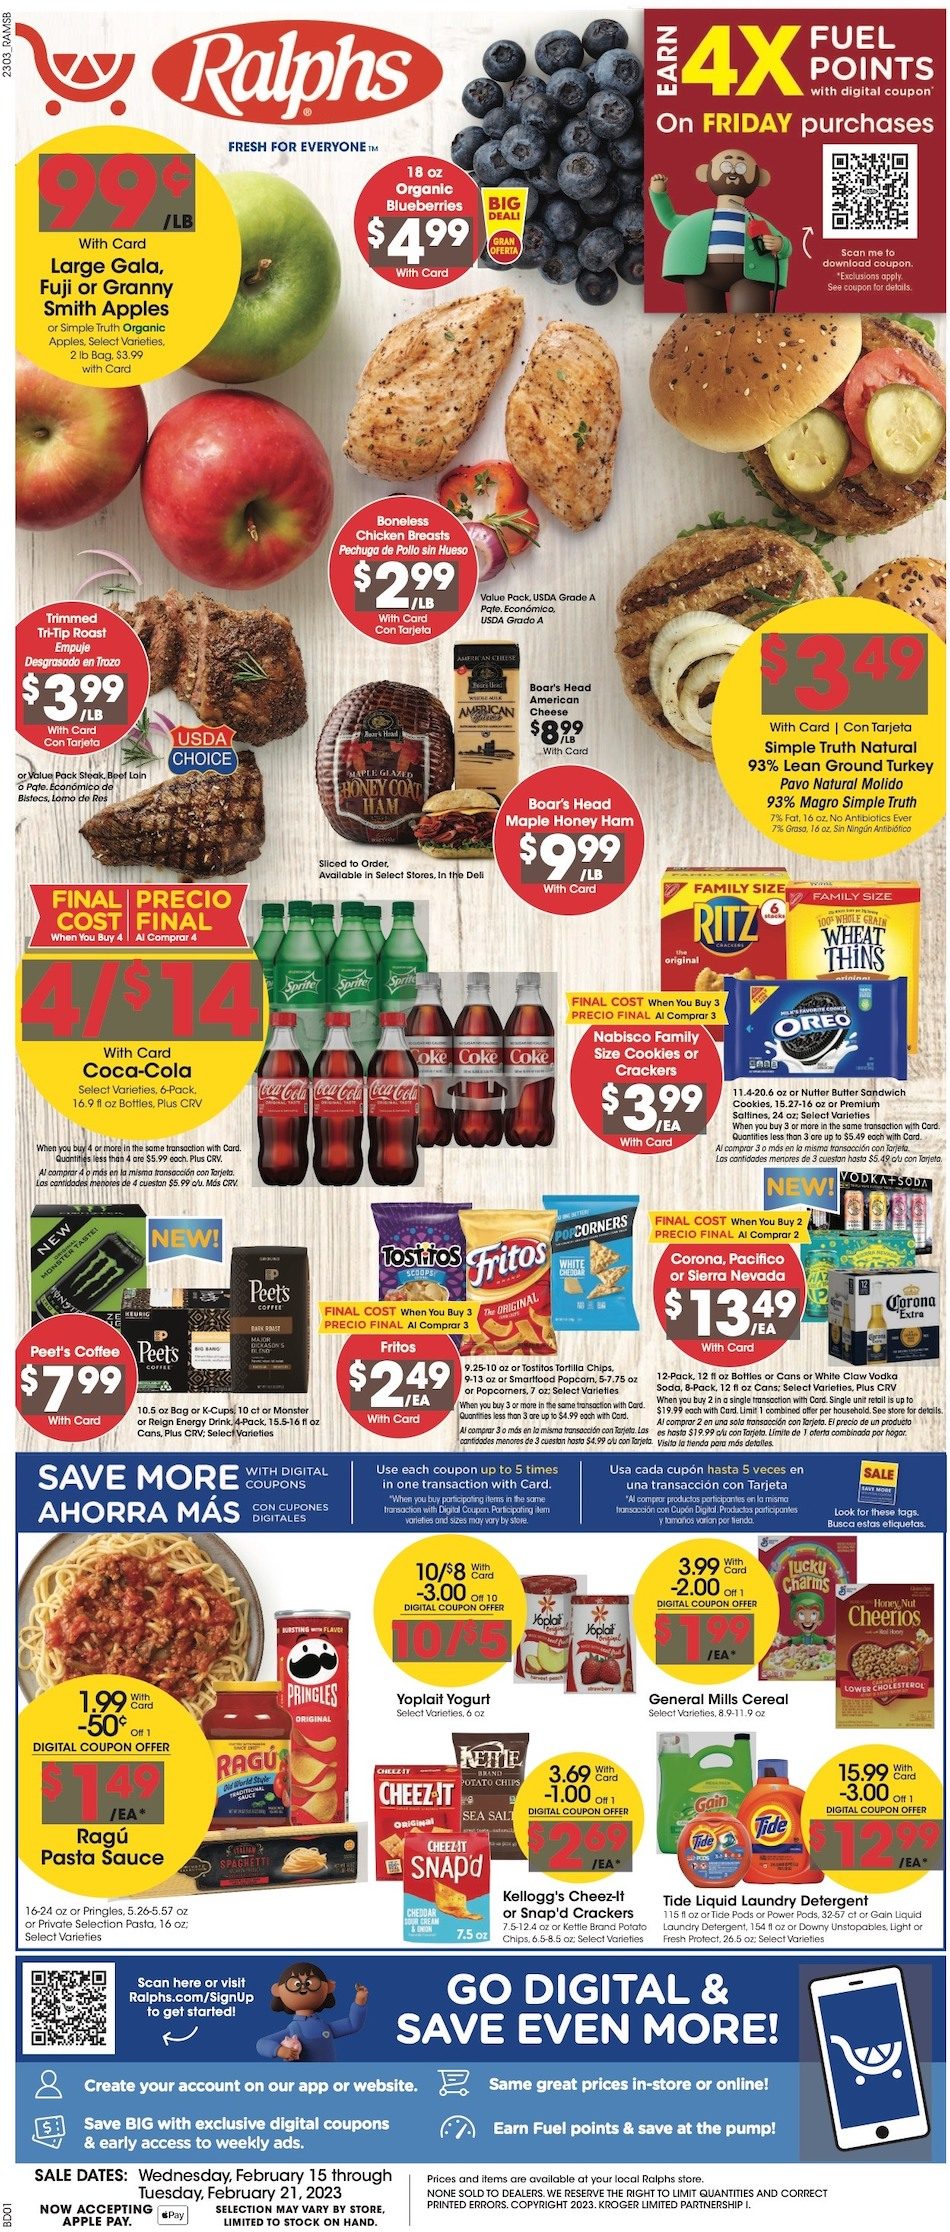 Ralphs Weekly Ad 15th – 21st February 2023 Page 1